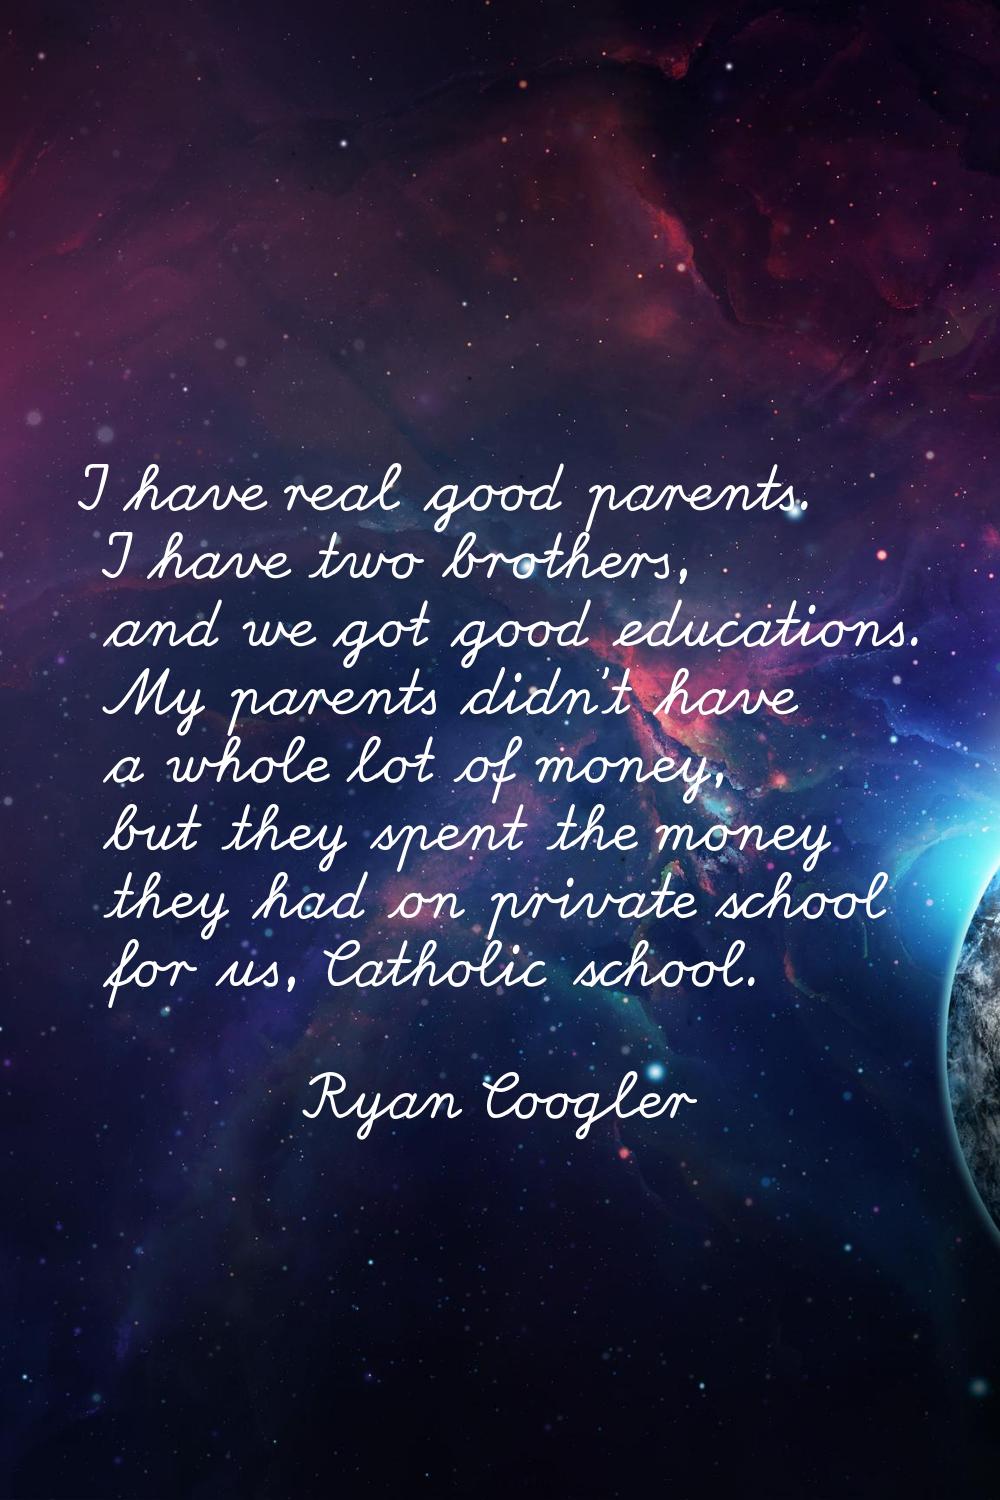 I have real good parents. I have two brothers, and we got good educations. My parents didn't have a